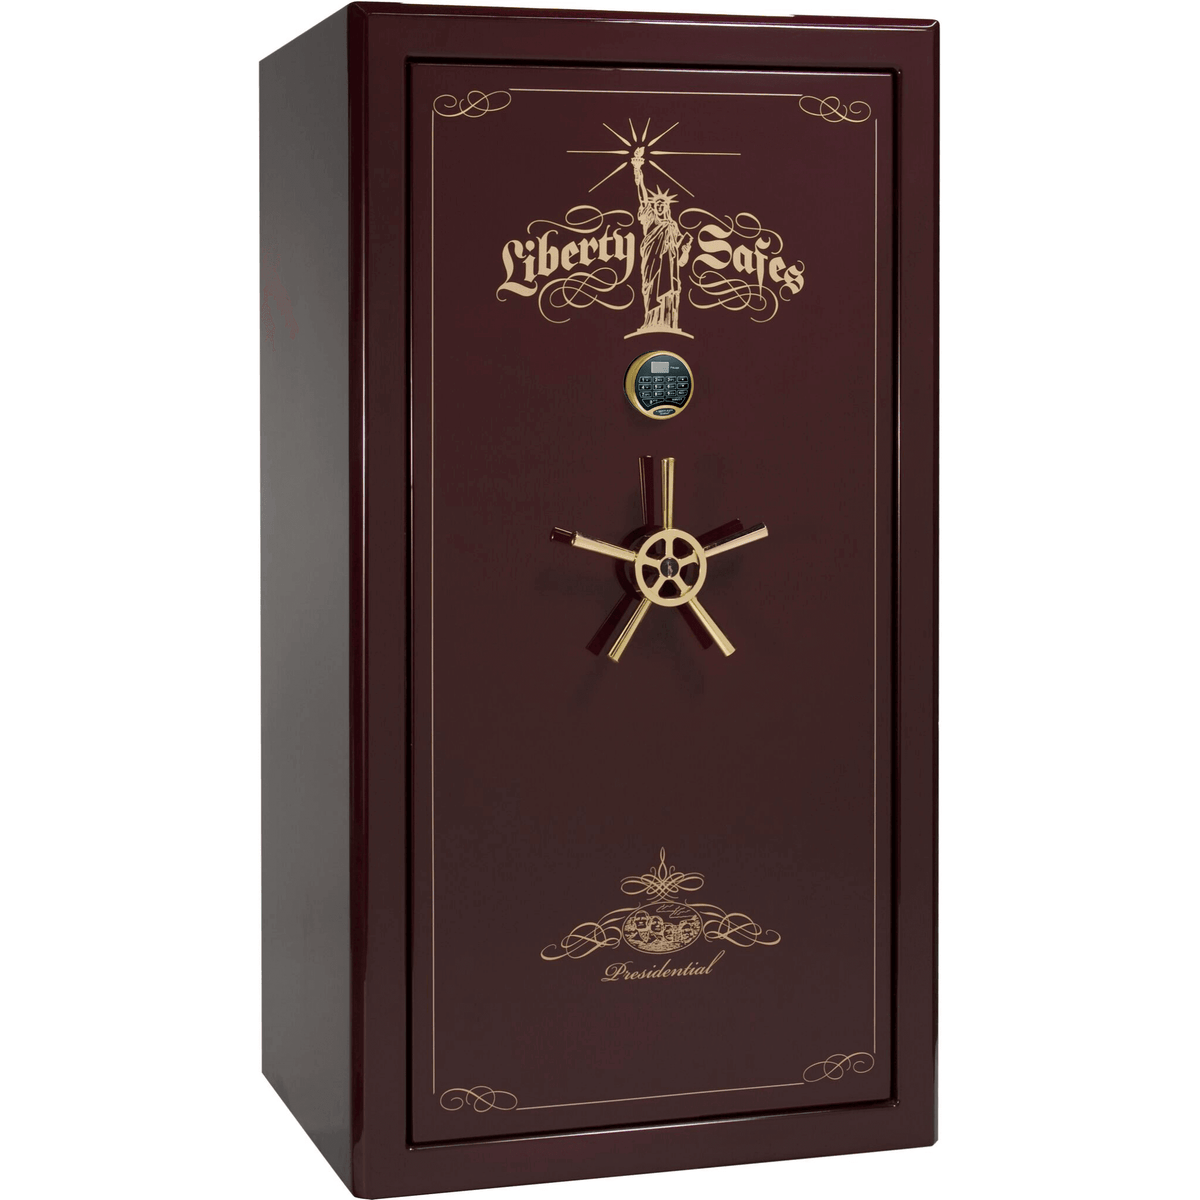 Liberty Safe Presidential 40 in Burgundy Gloss with 24k Gold Electronic Lock, closed door.